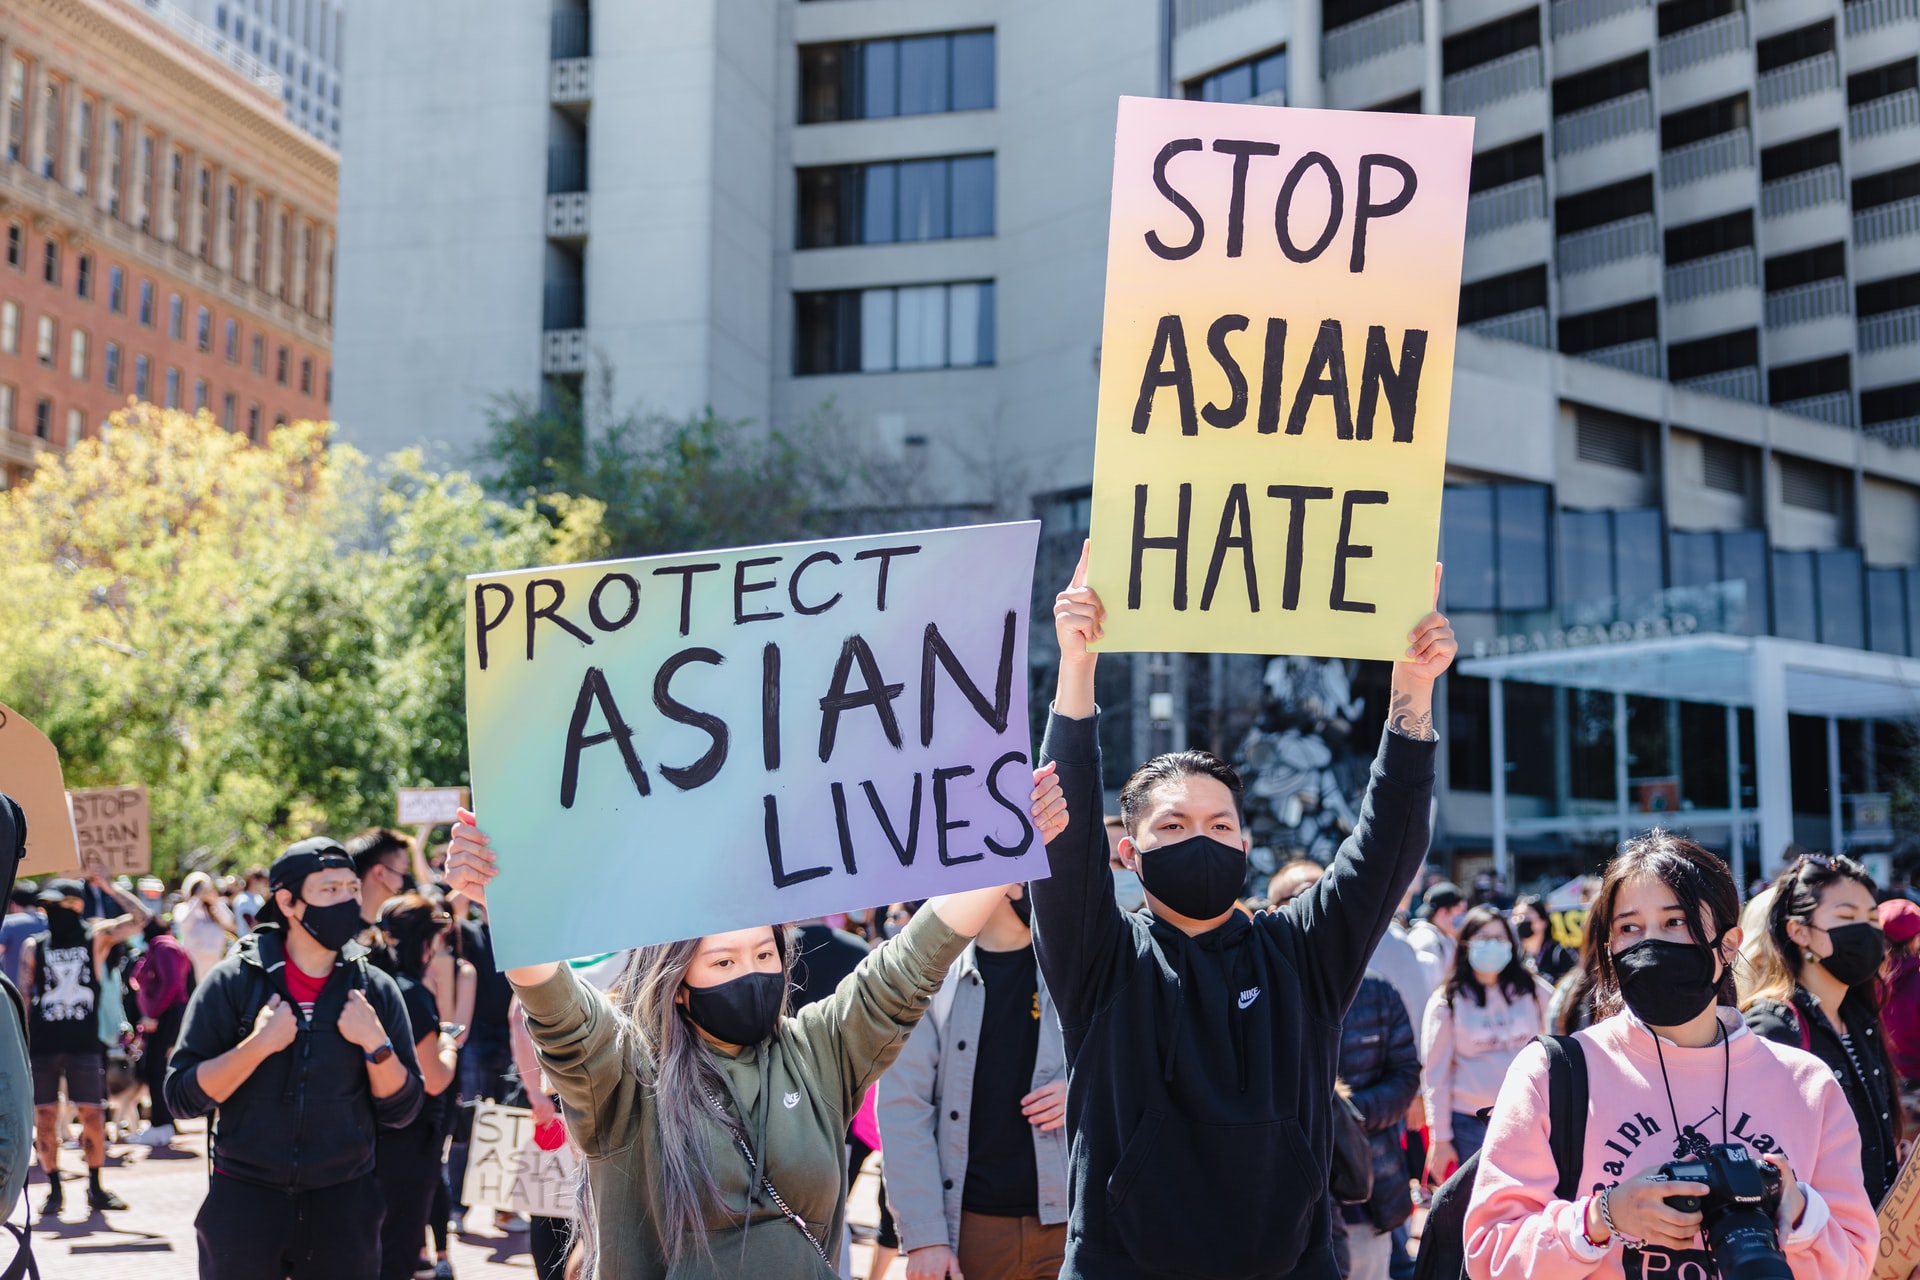 About Asian Hate